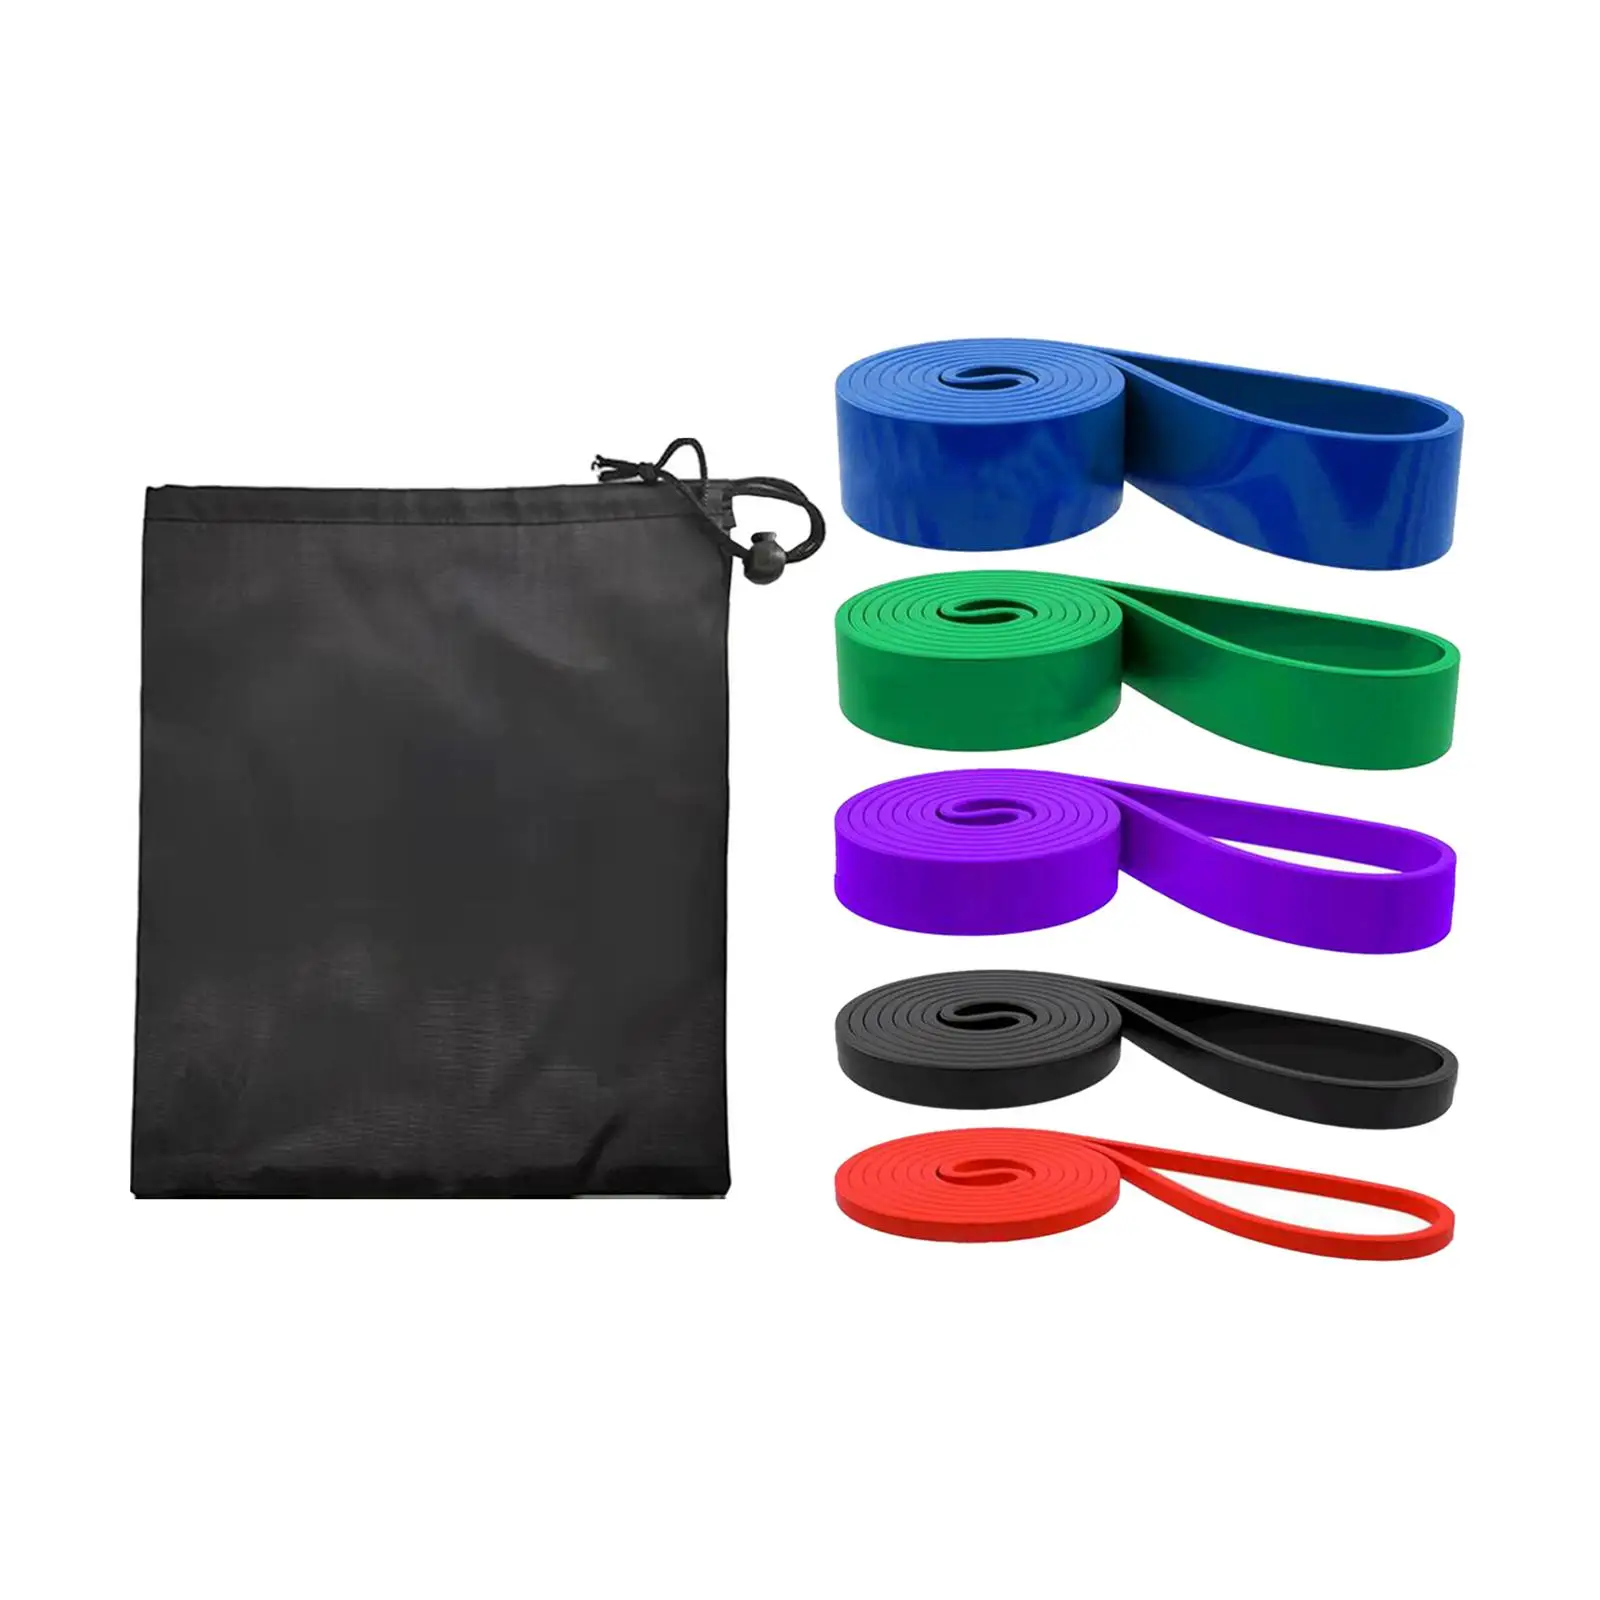 Resistance Bands Men Women Pull up Assist Bands Full Body Training Workout Loop Band with Storage Bag for Yoga Workout Pilates